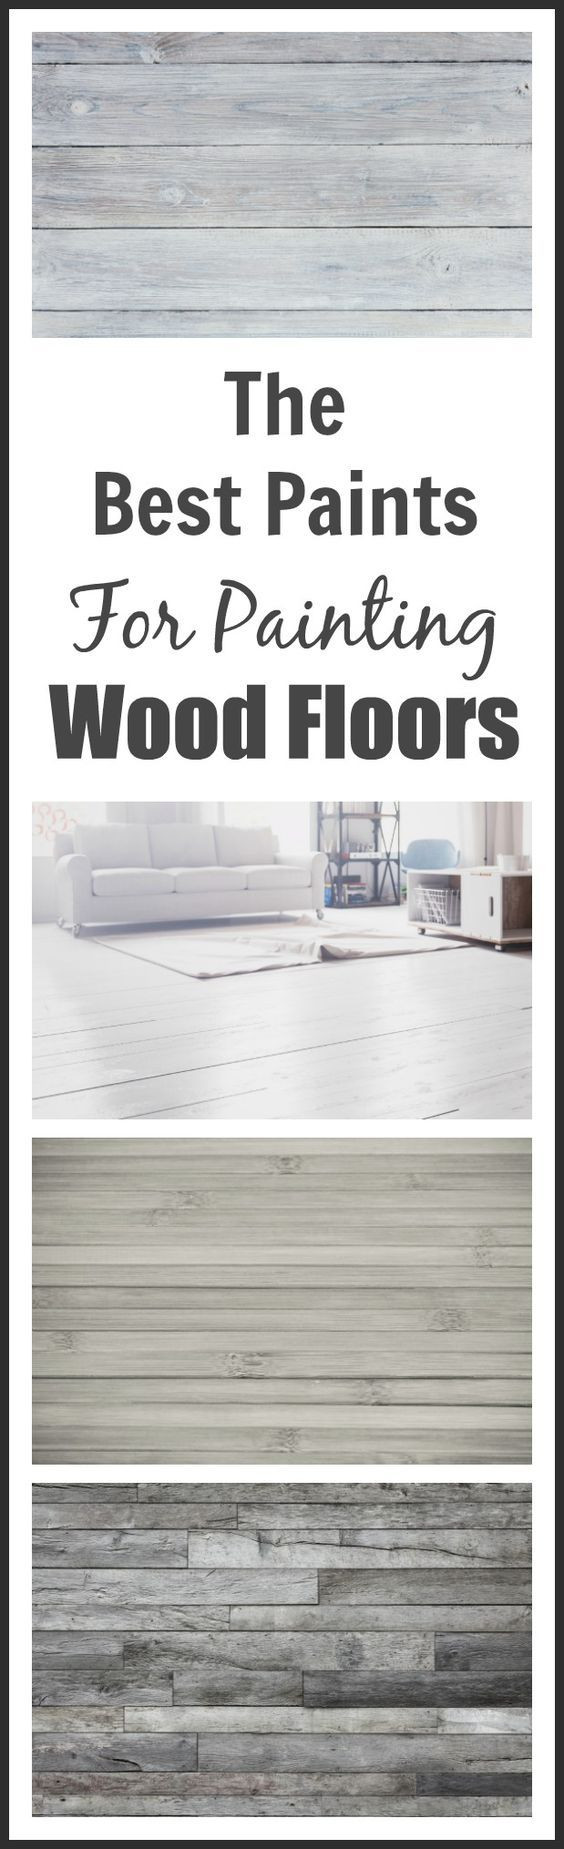 exquisite hardwood floors bend oregon of 65 best home images on pinterest master bathroom bathrooms and within yes you can paint wood floors its a great way to give old worn